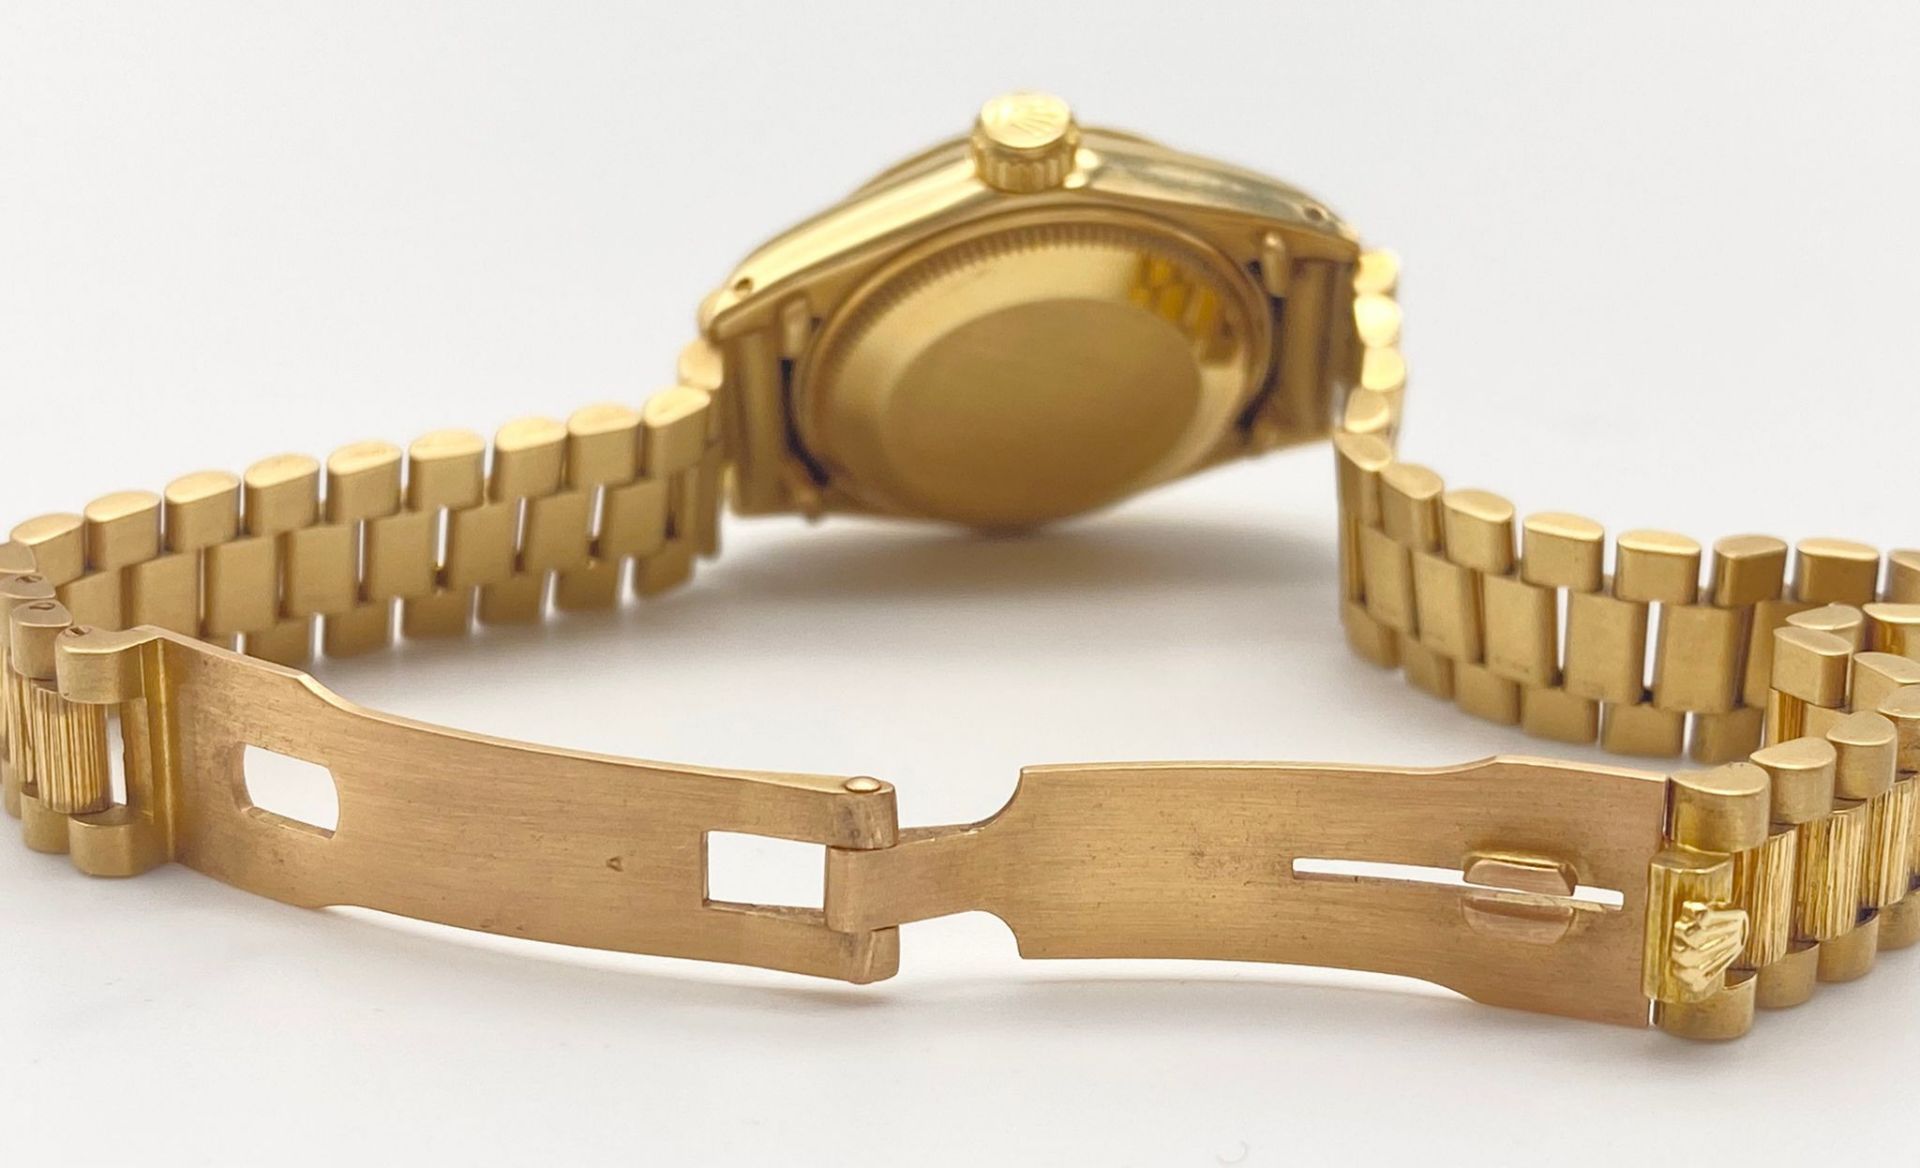 A 1980s Rolex Oyster Perpetual 18K Solid Gold and Diamond Datejust Ladies Watch - with Bark-Effect - Image 5 of 7